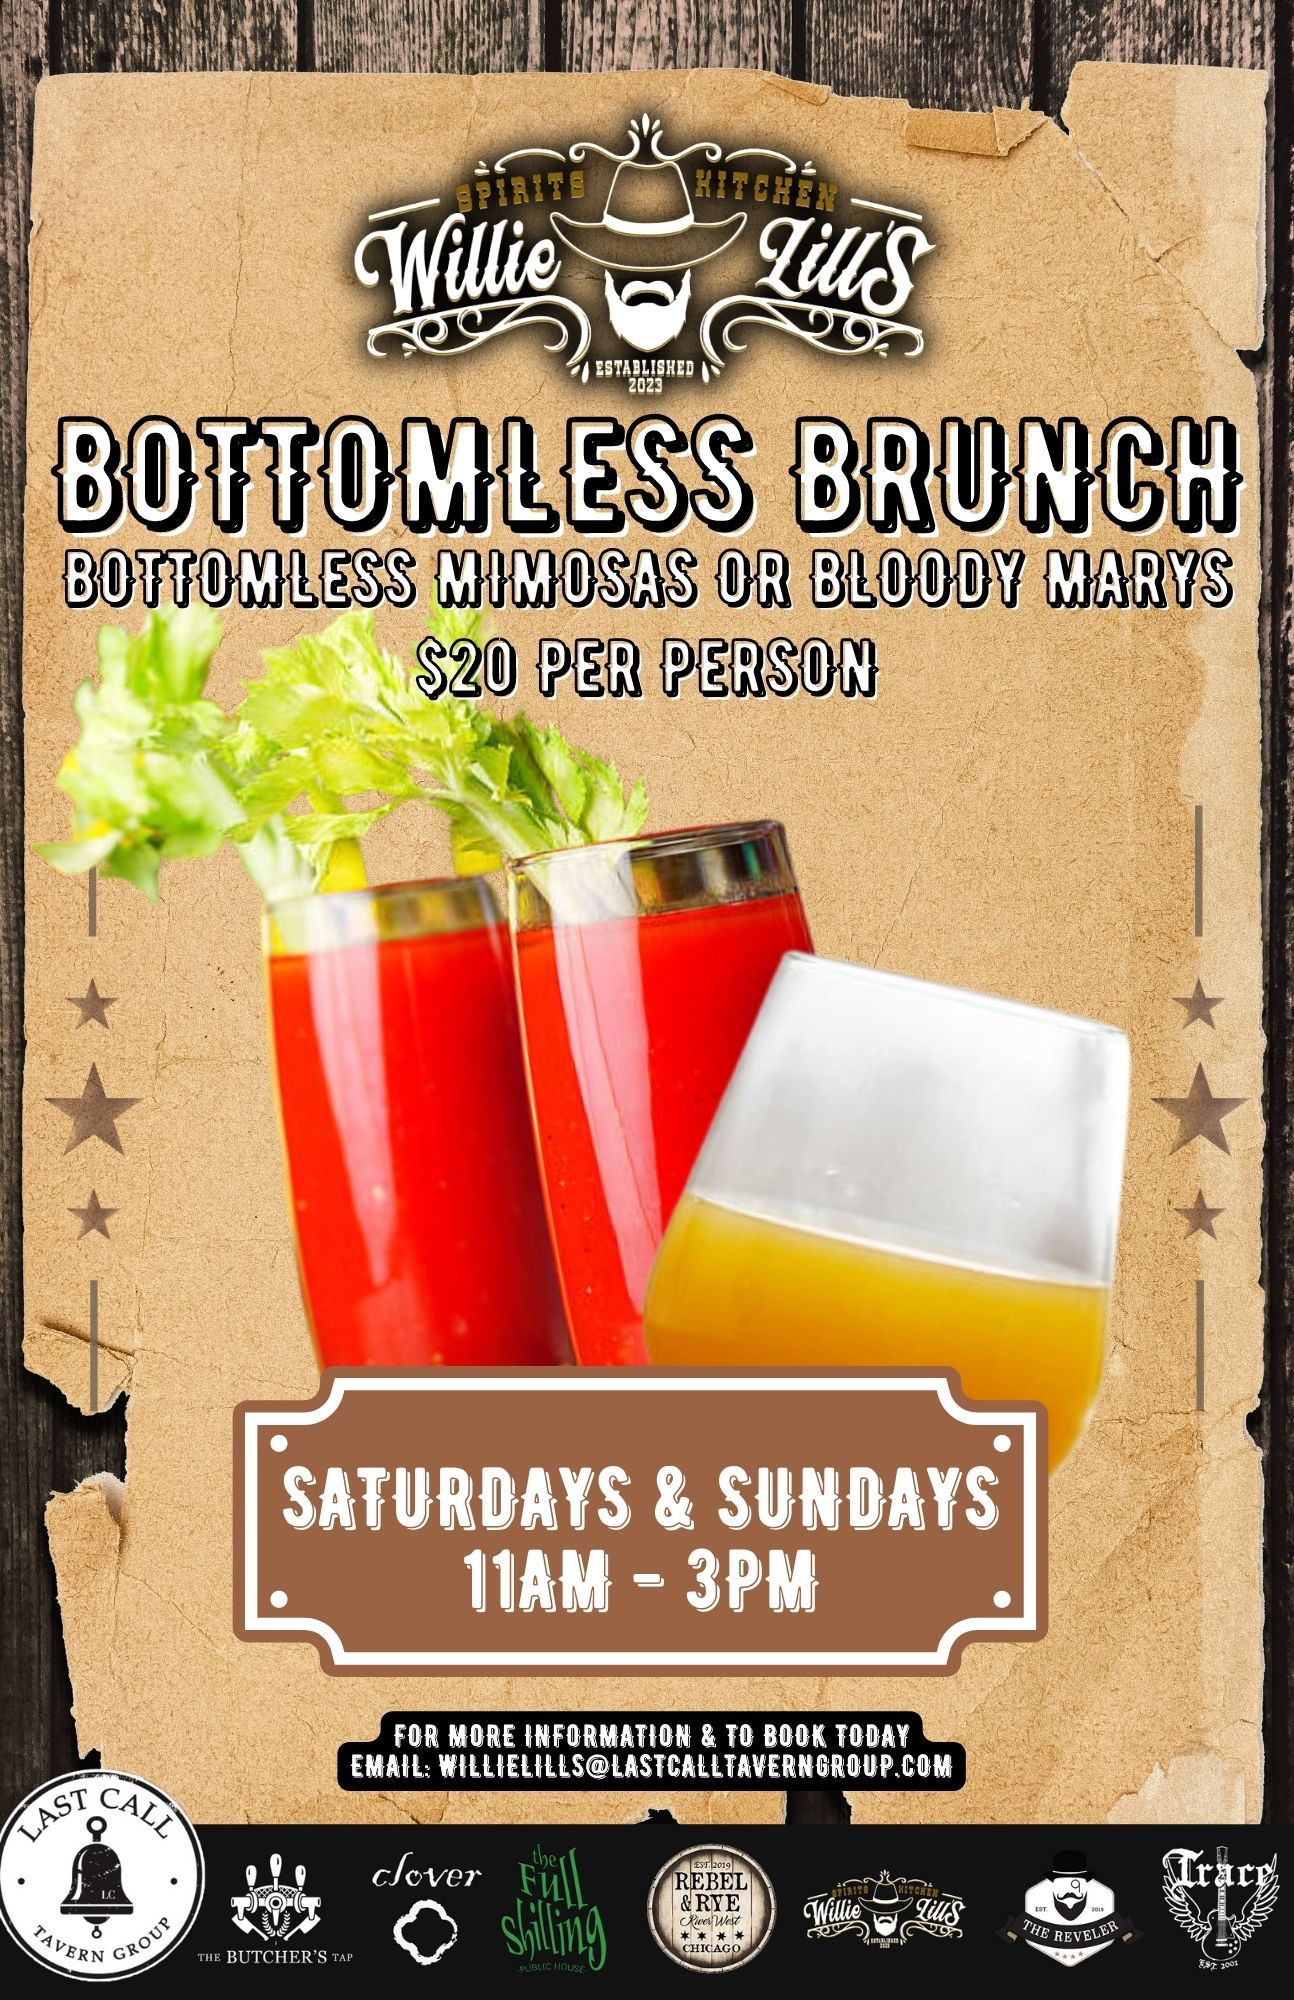 Wille Lill's Bottomless Brunch